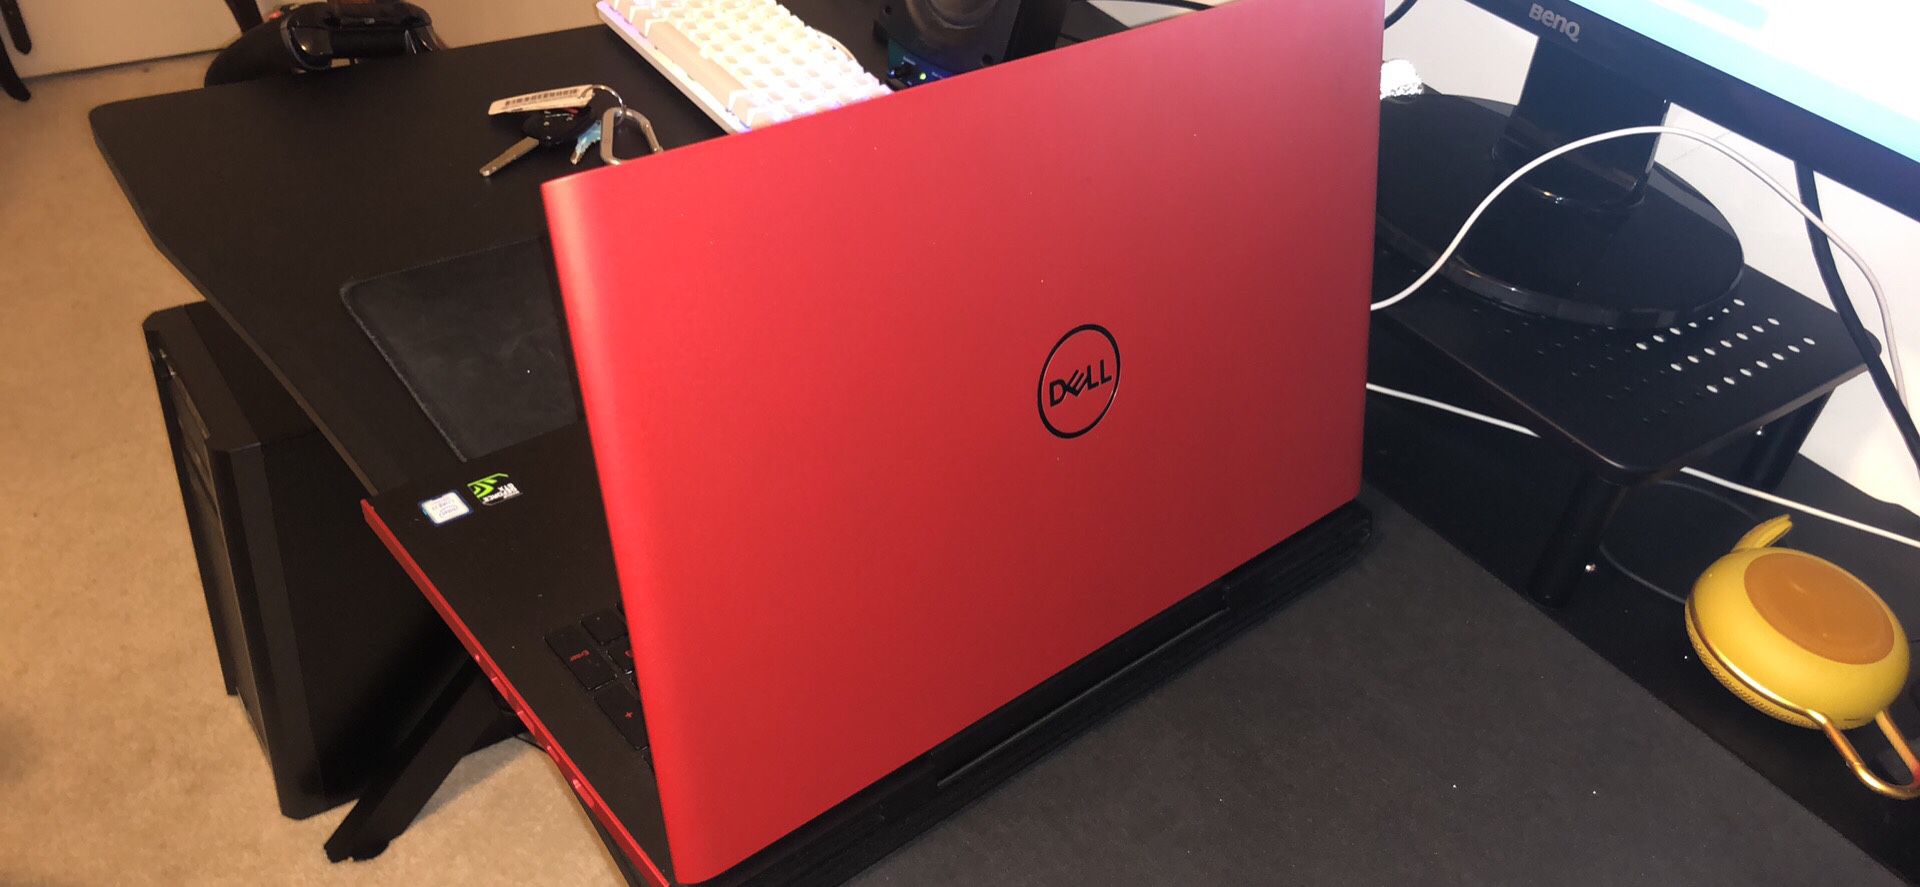 Dell G5 15inch gaming laptop